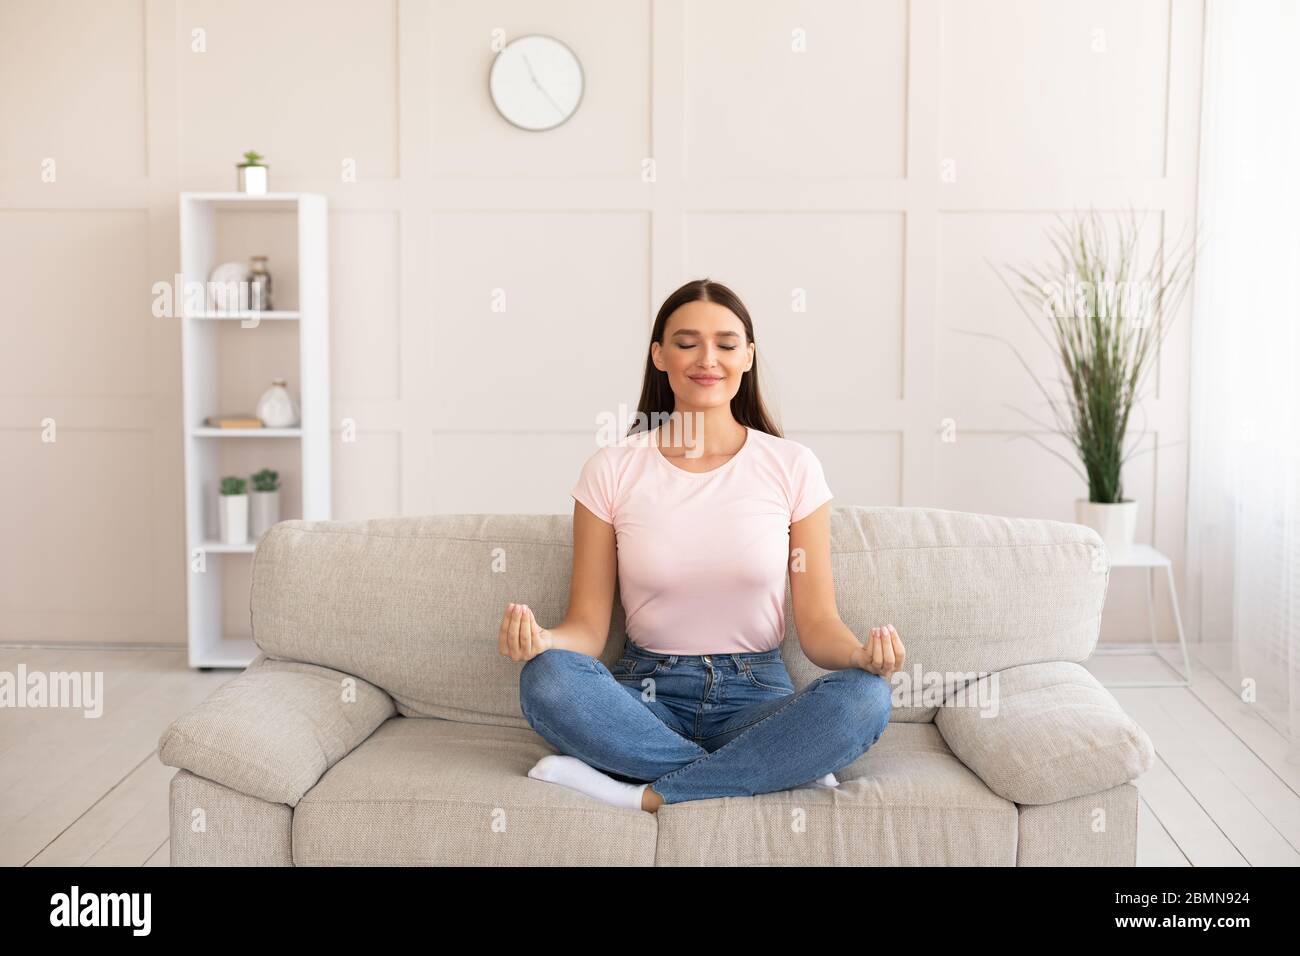 Woman Meditating Sitting In Lotus Position On Couch At Home Stock Photo